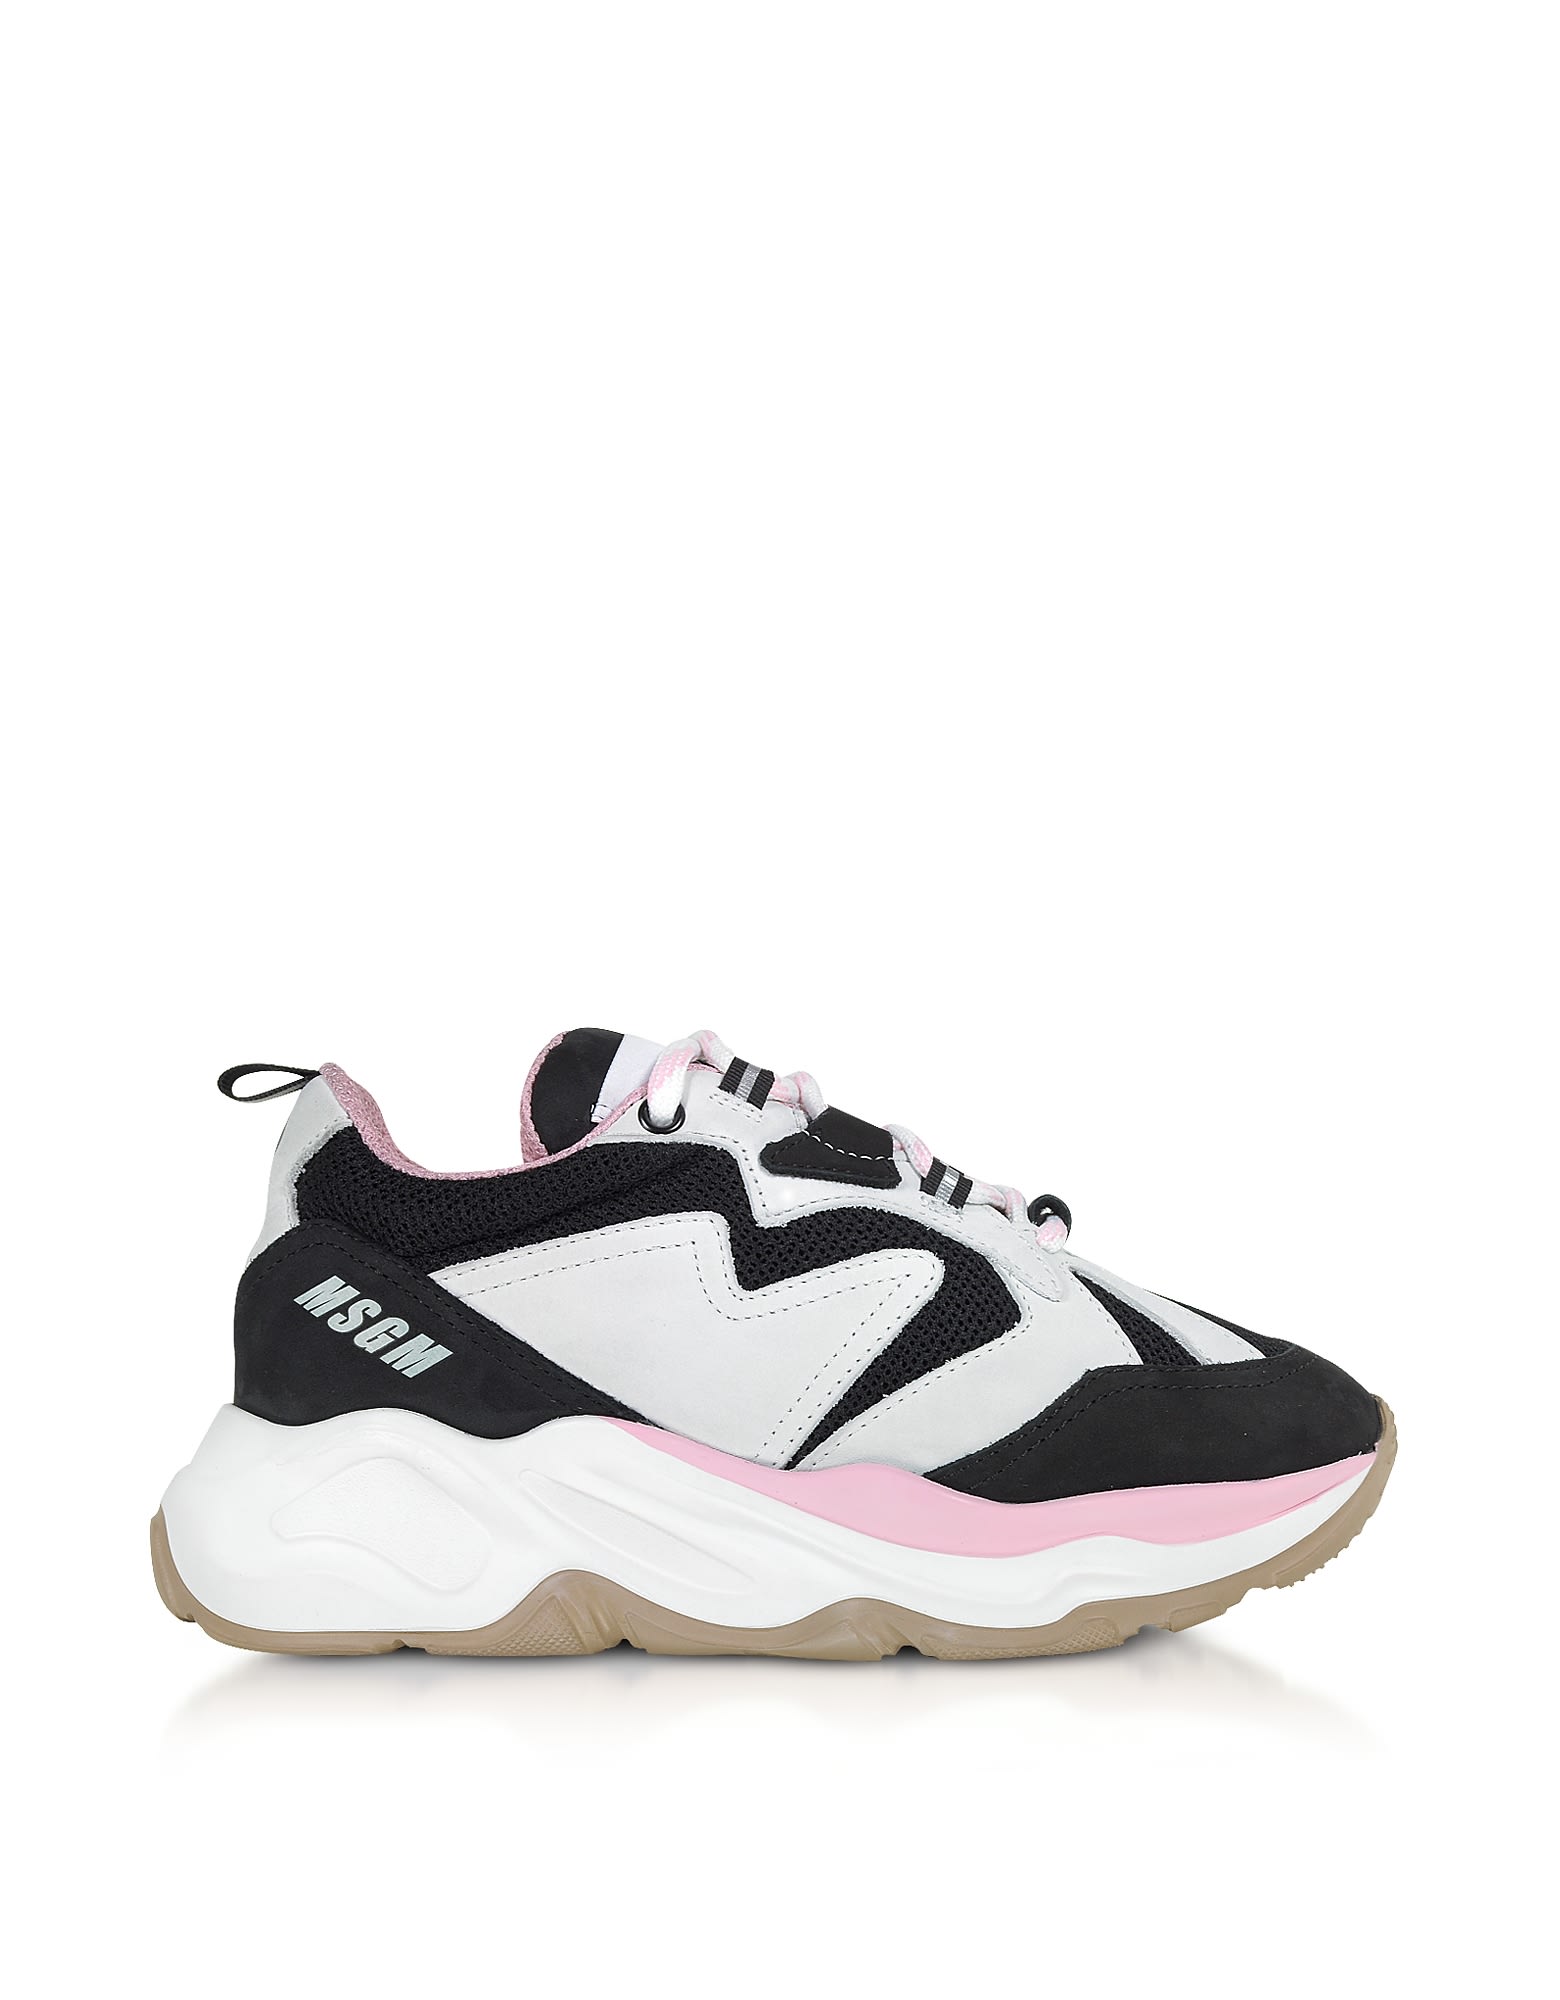 MSGM Black & Pink Attack Sneakers